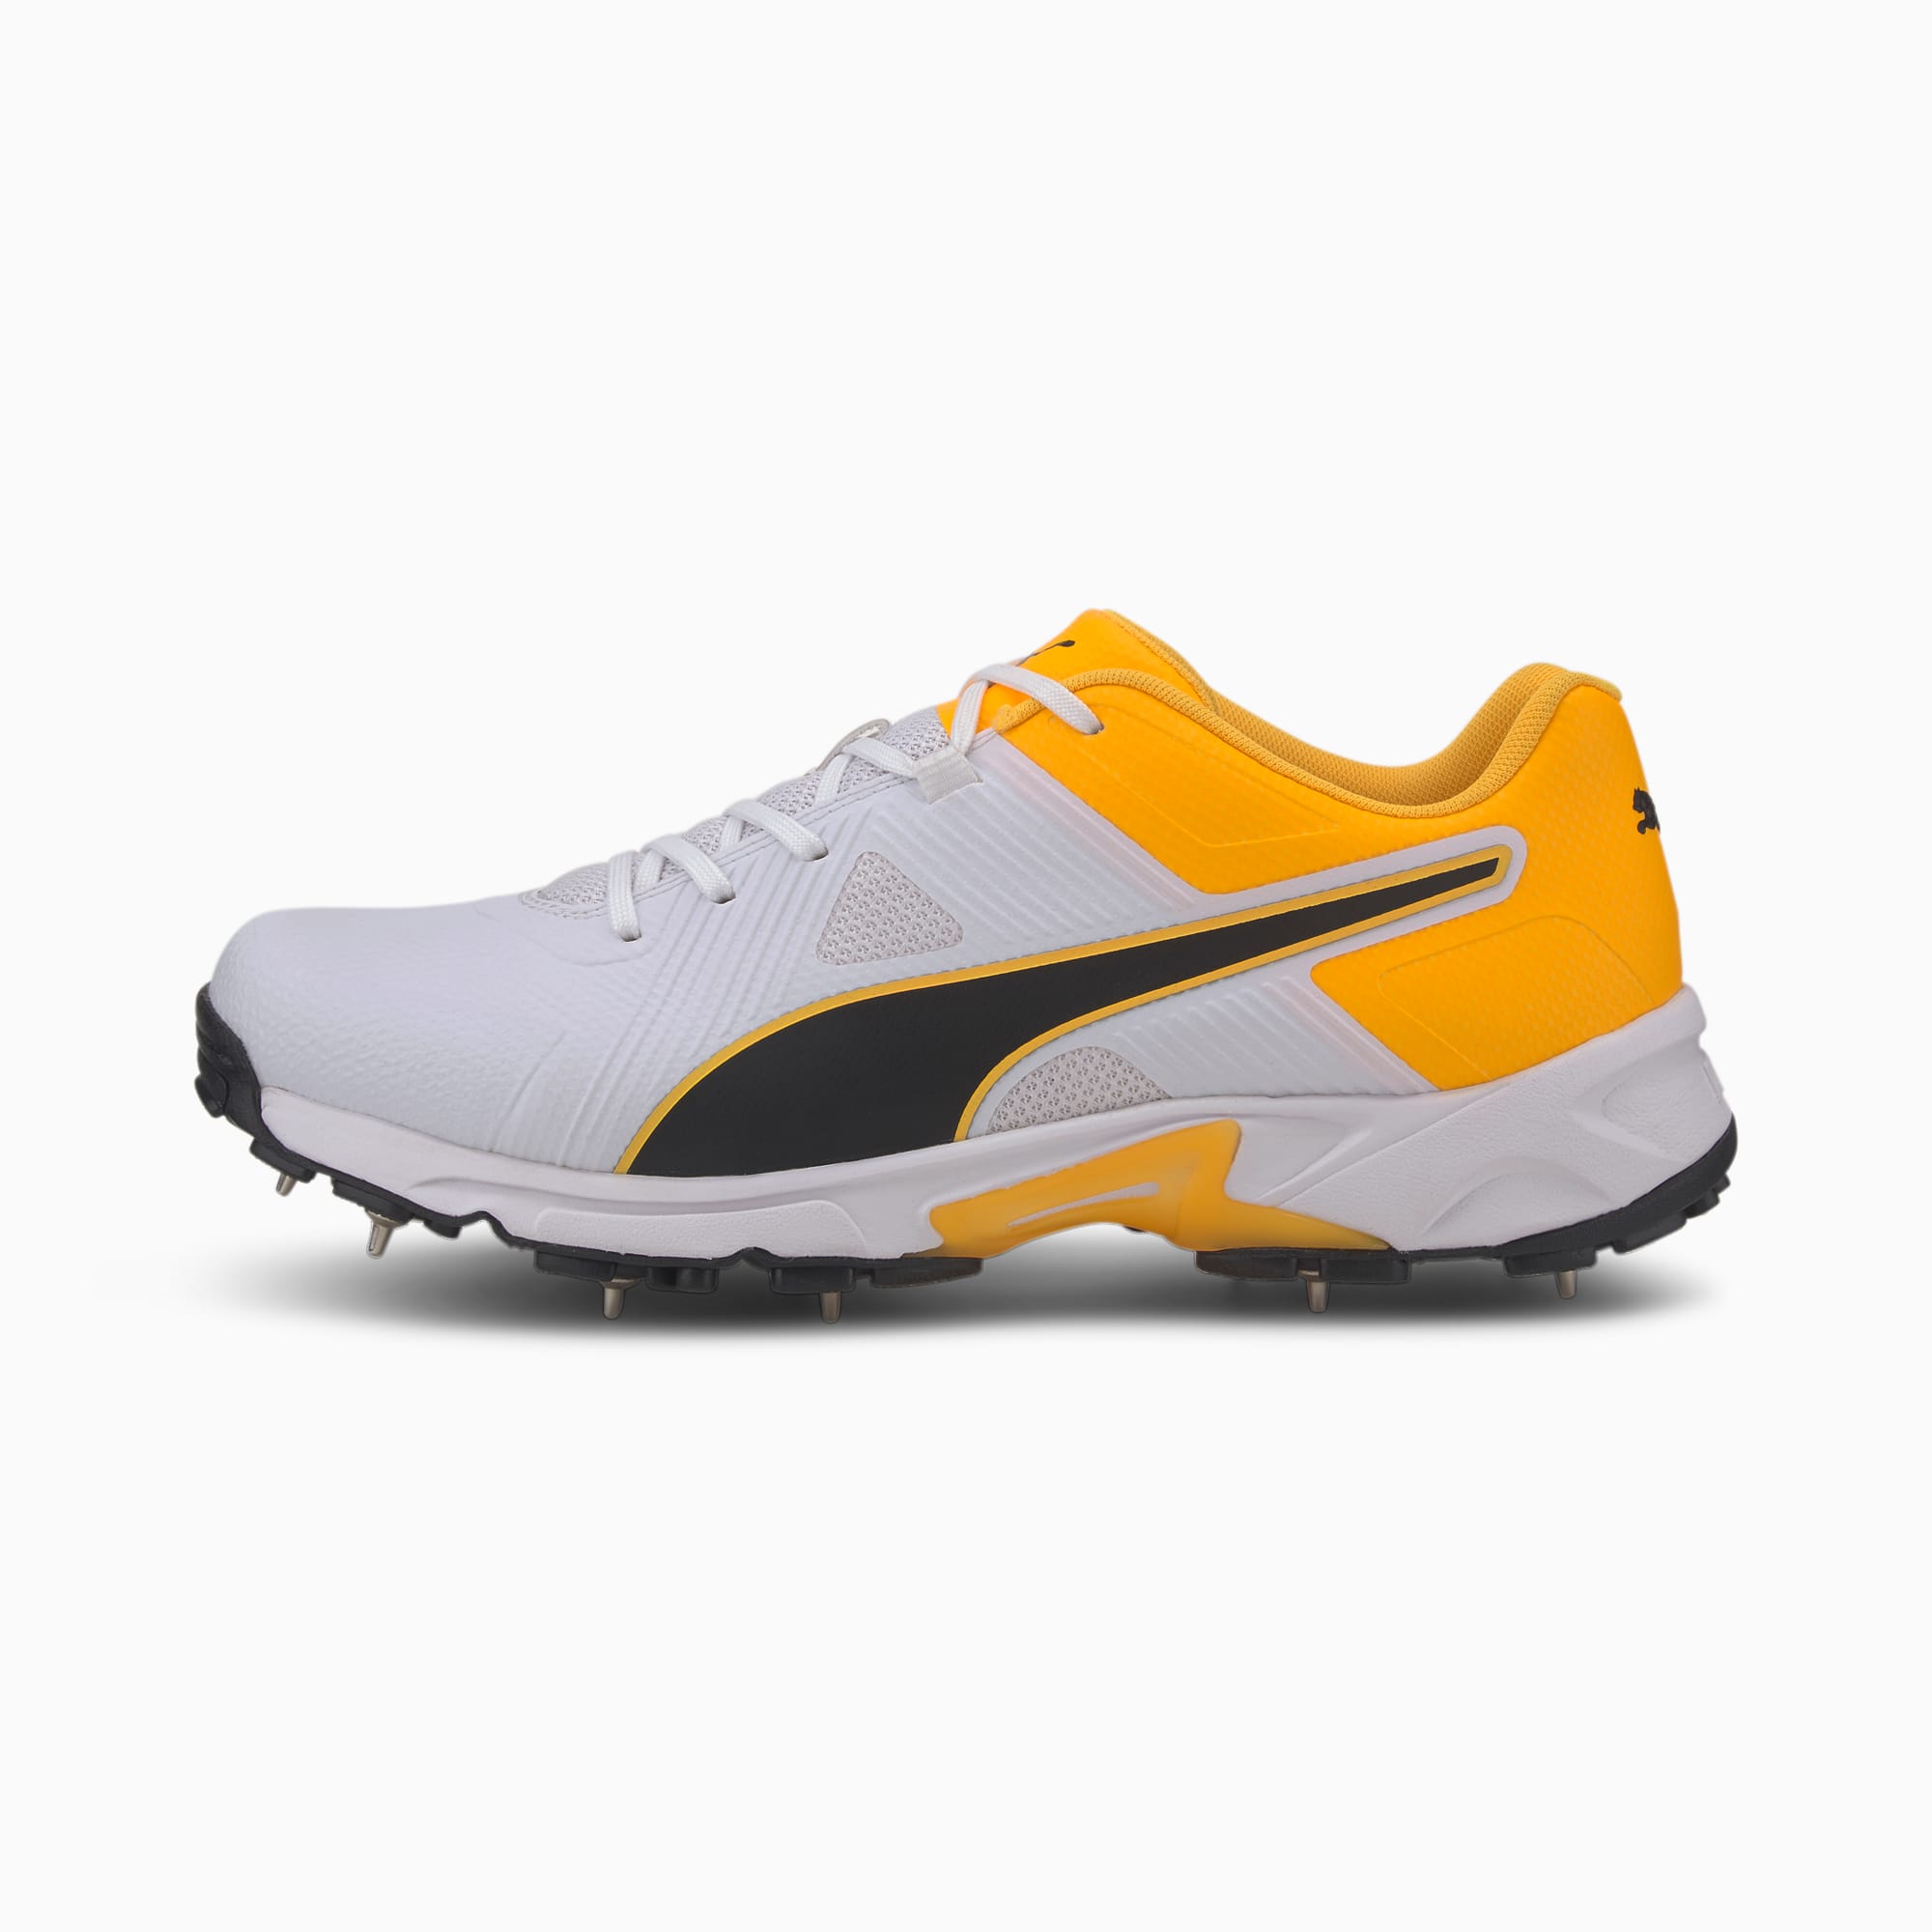 puma cell cricket shoes